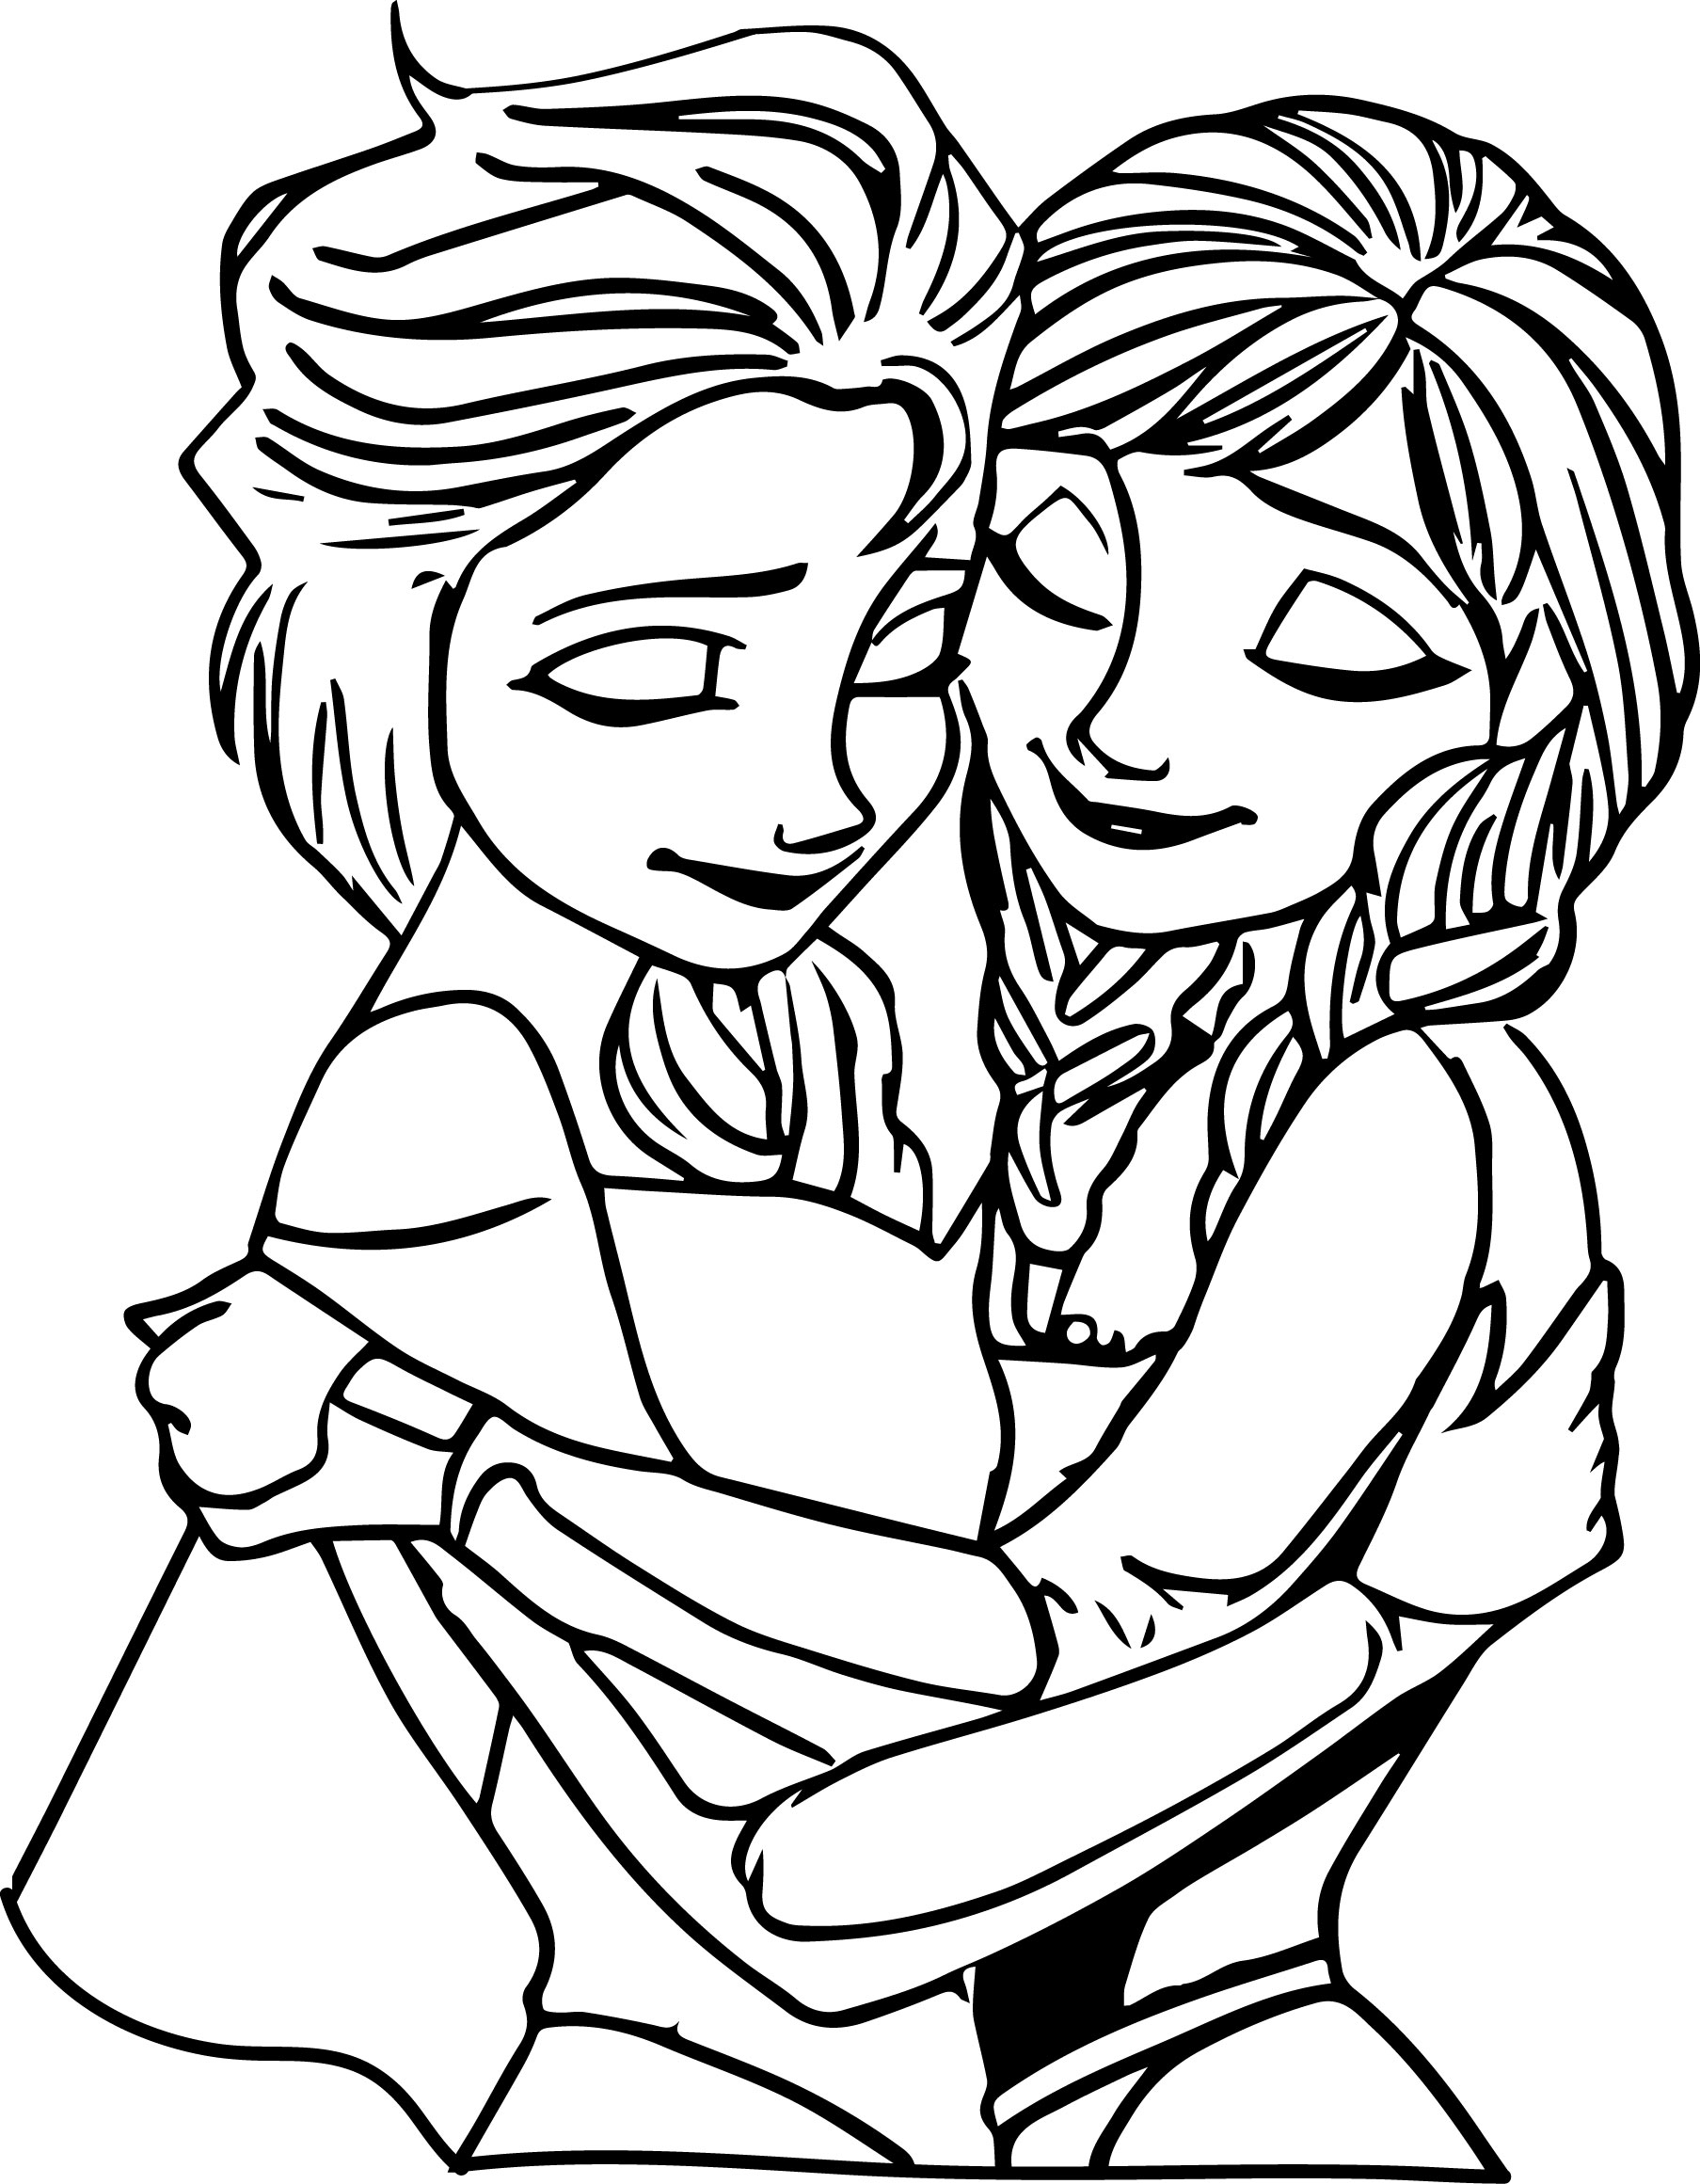 princess anna coloring pages elegant frozen elsa anna hug coloring pages and